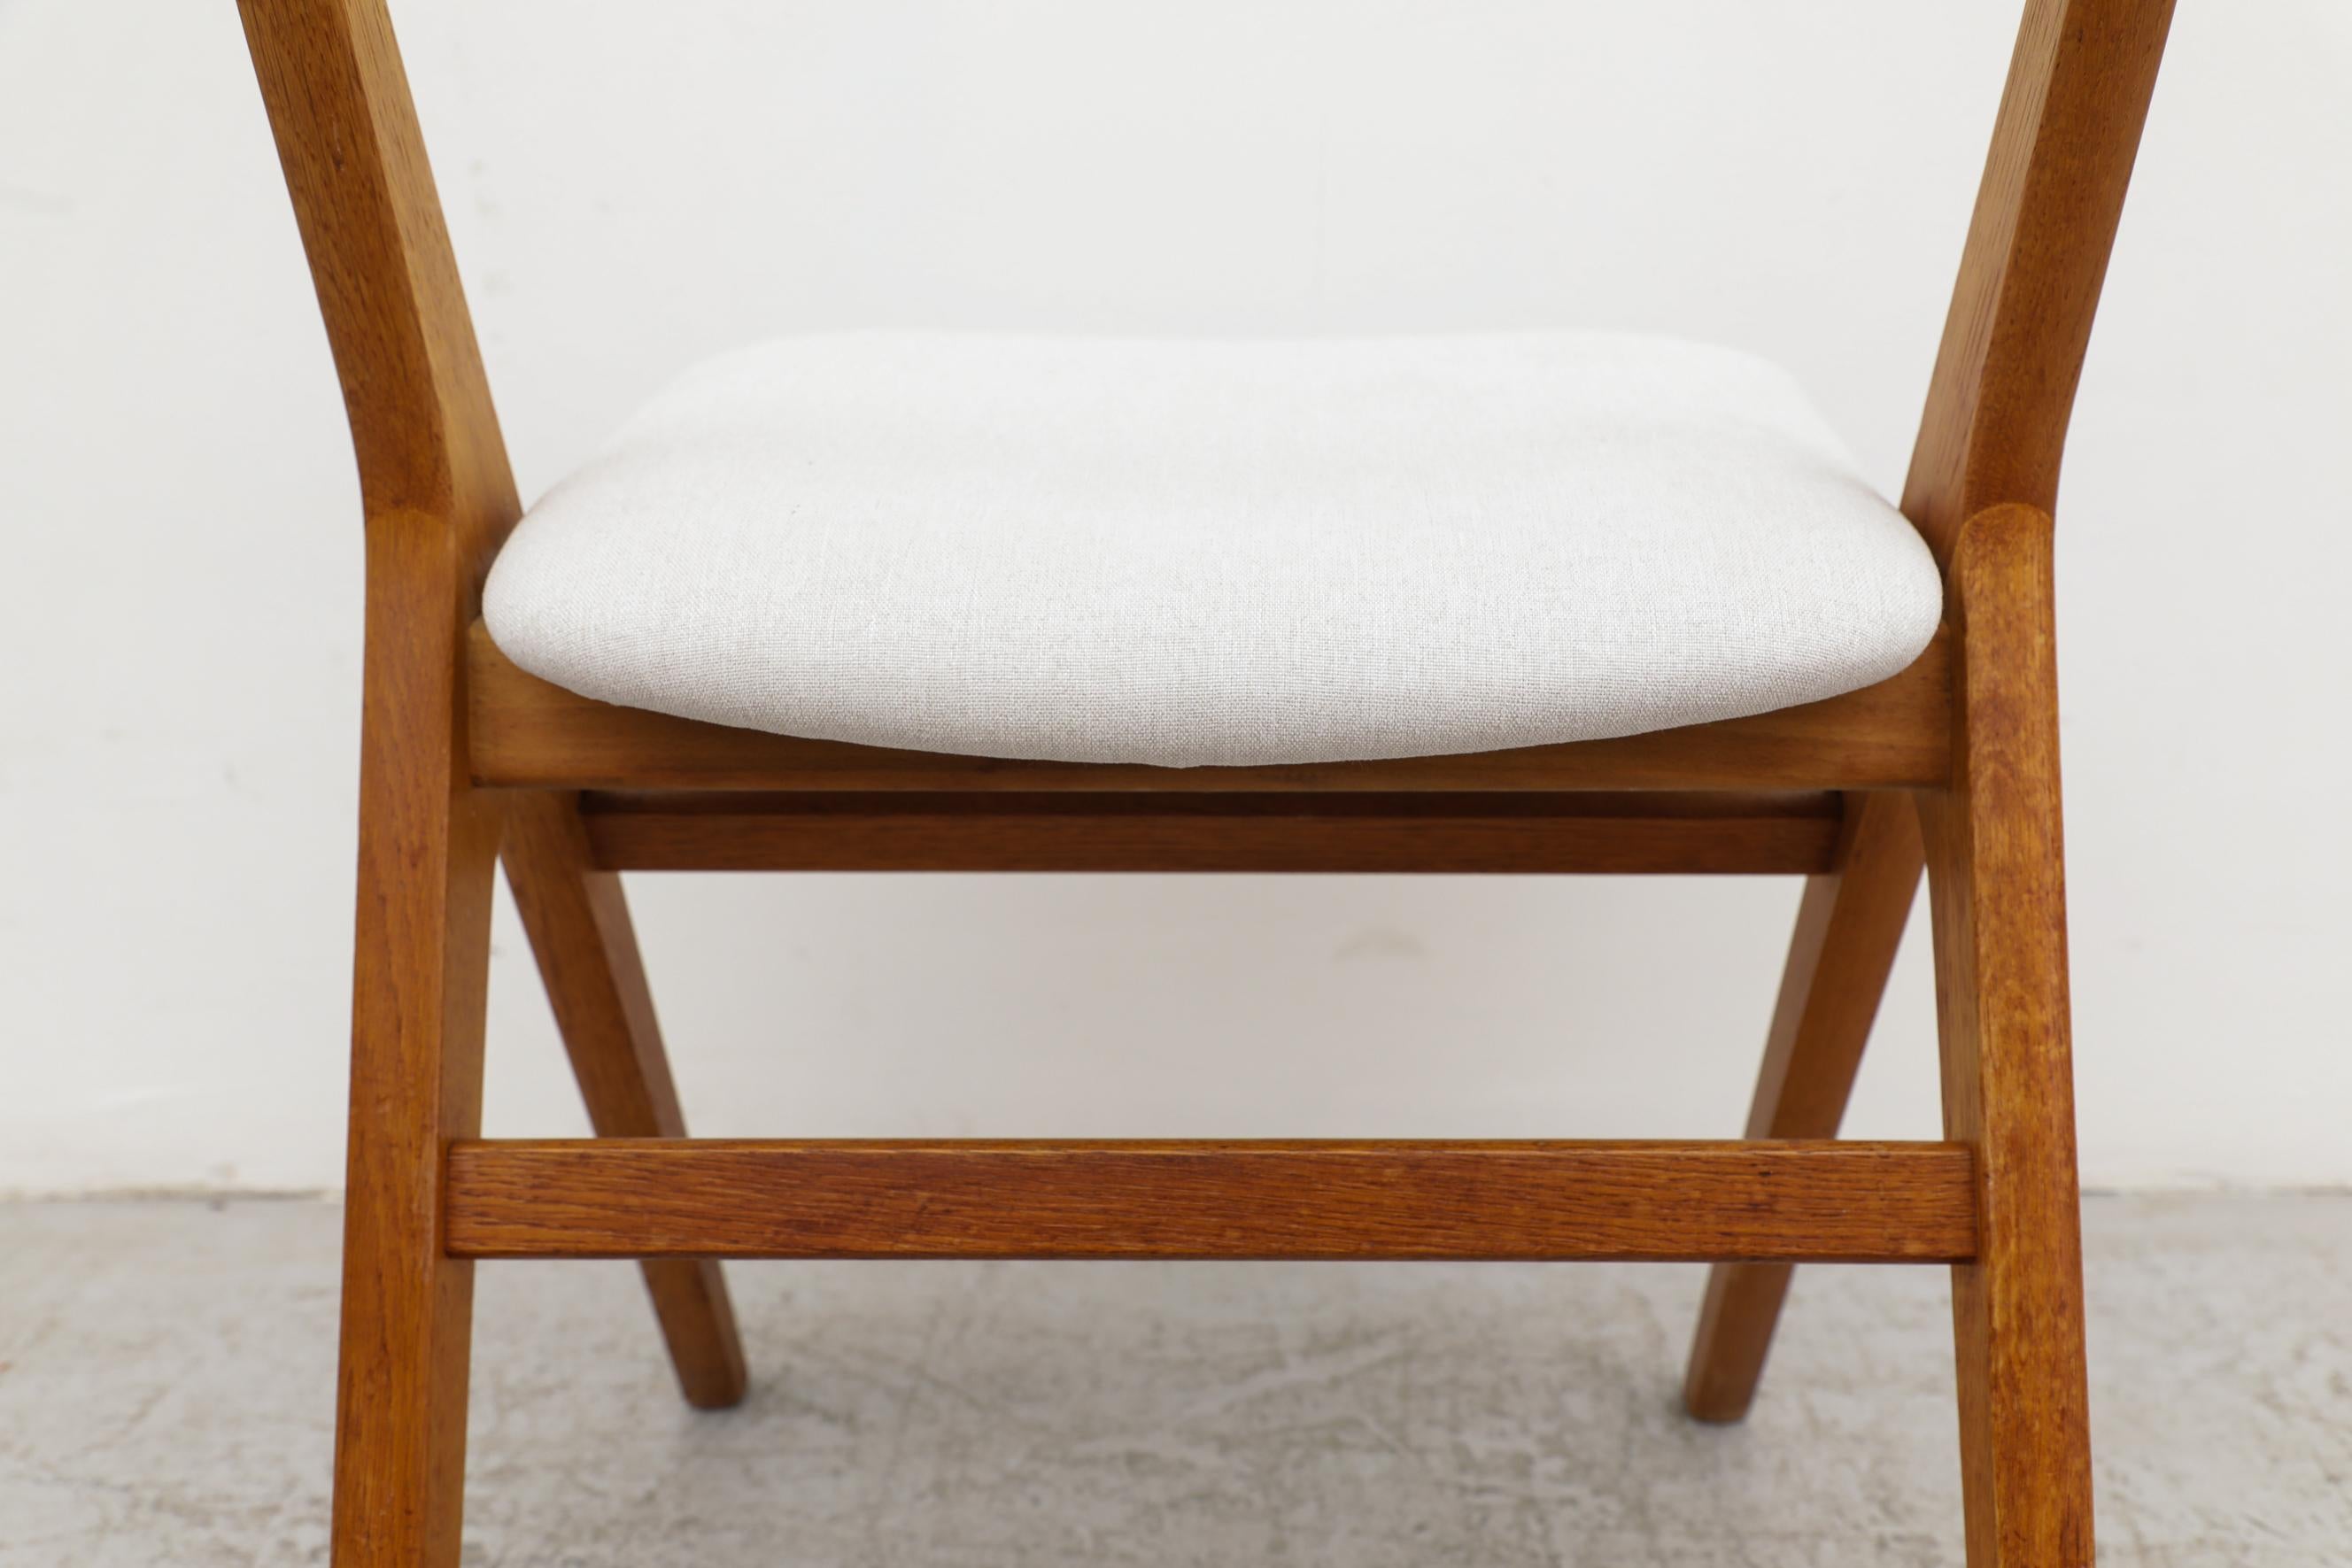 Single Hans Wegner Inspired Oak Dining Chair with Compass Legs and Bowed Back For Sale 7